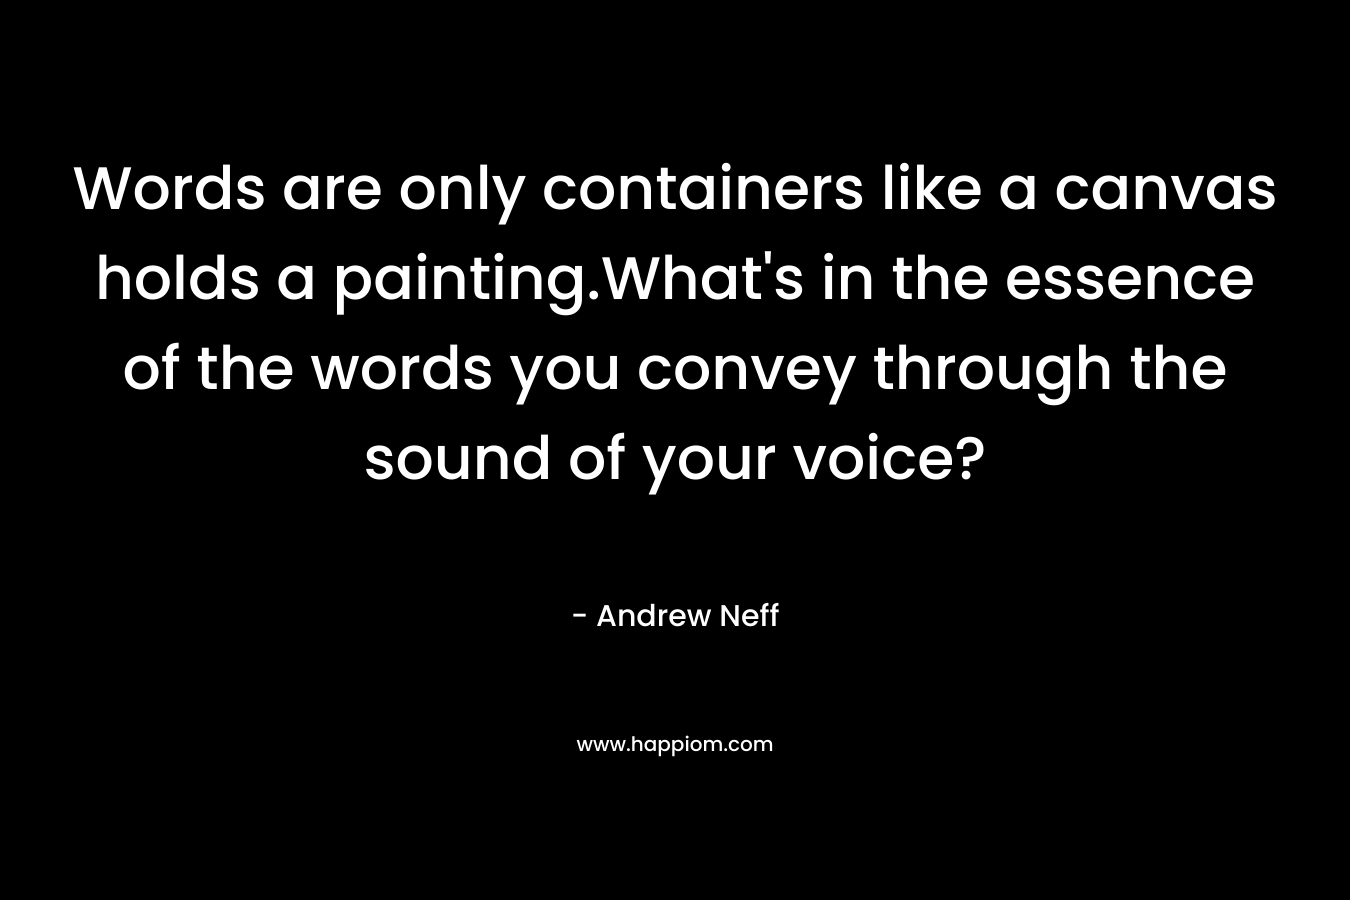 Words are only containers like a canvas holds a painting.What’s in the essence of the words you convey through the sound of your voice? – Andrew Neff